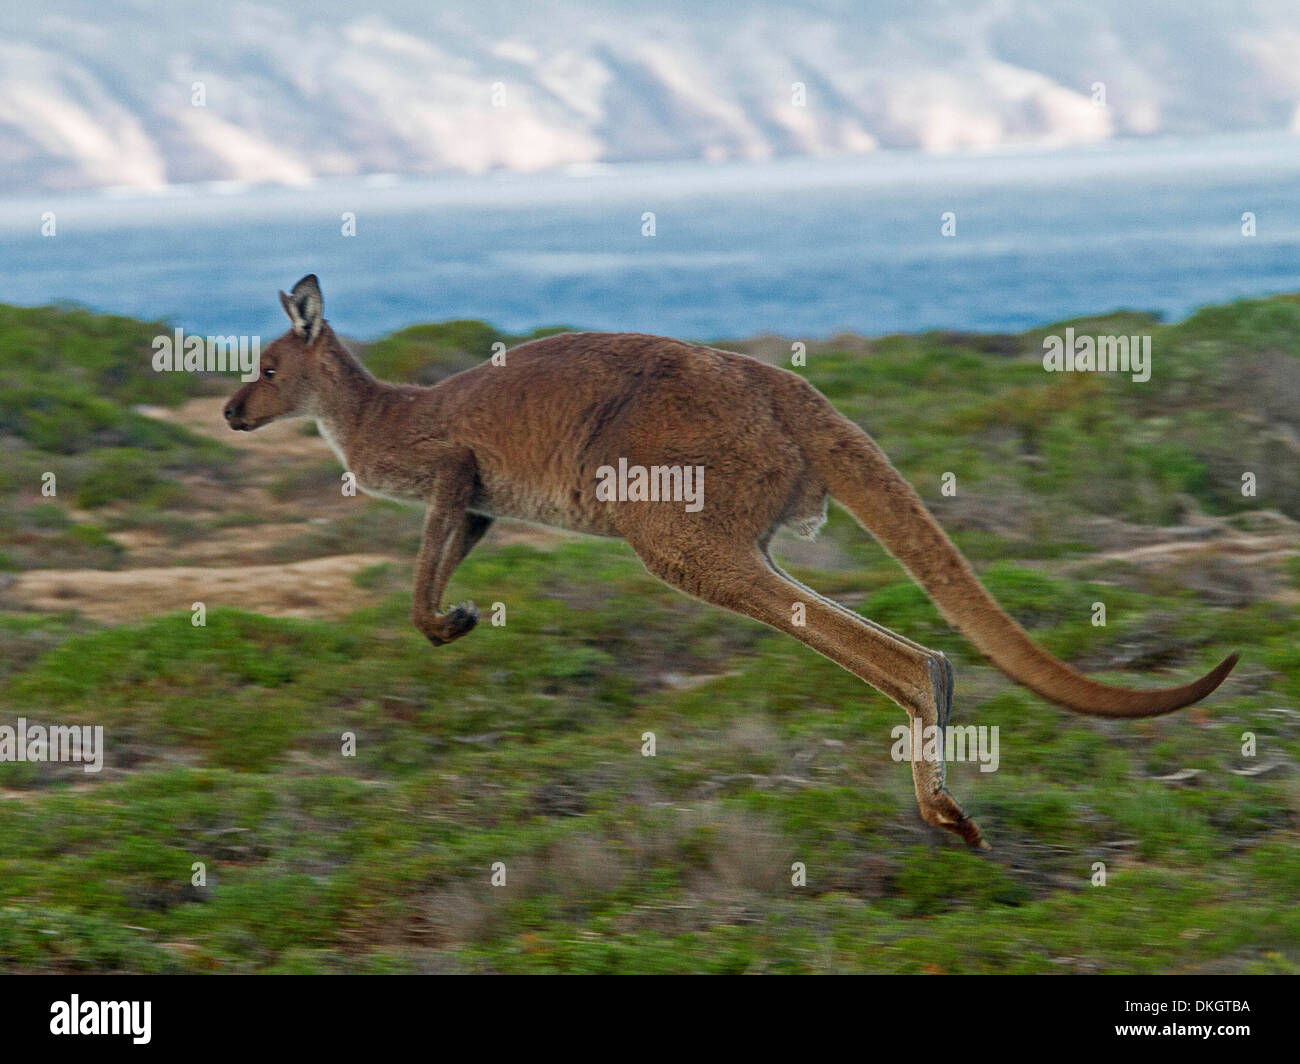 Large male western grey kangaroo Macropus fuliginosus leaping across landscape and airborne beside ocean in Lincoln National Park, Eyre Peninsula SA Stock Photo